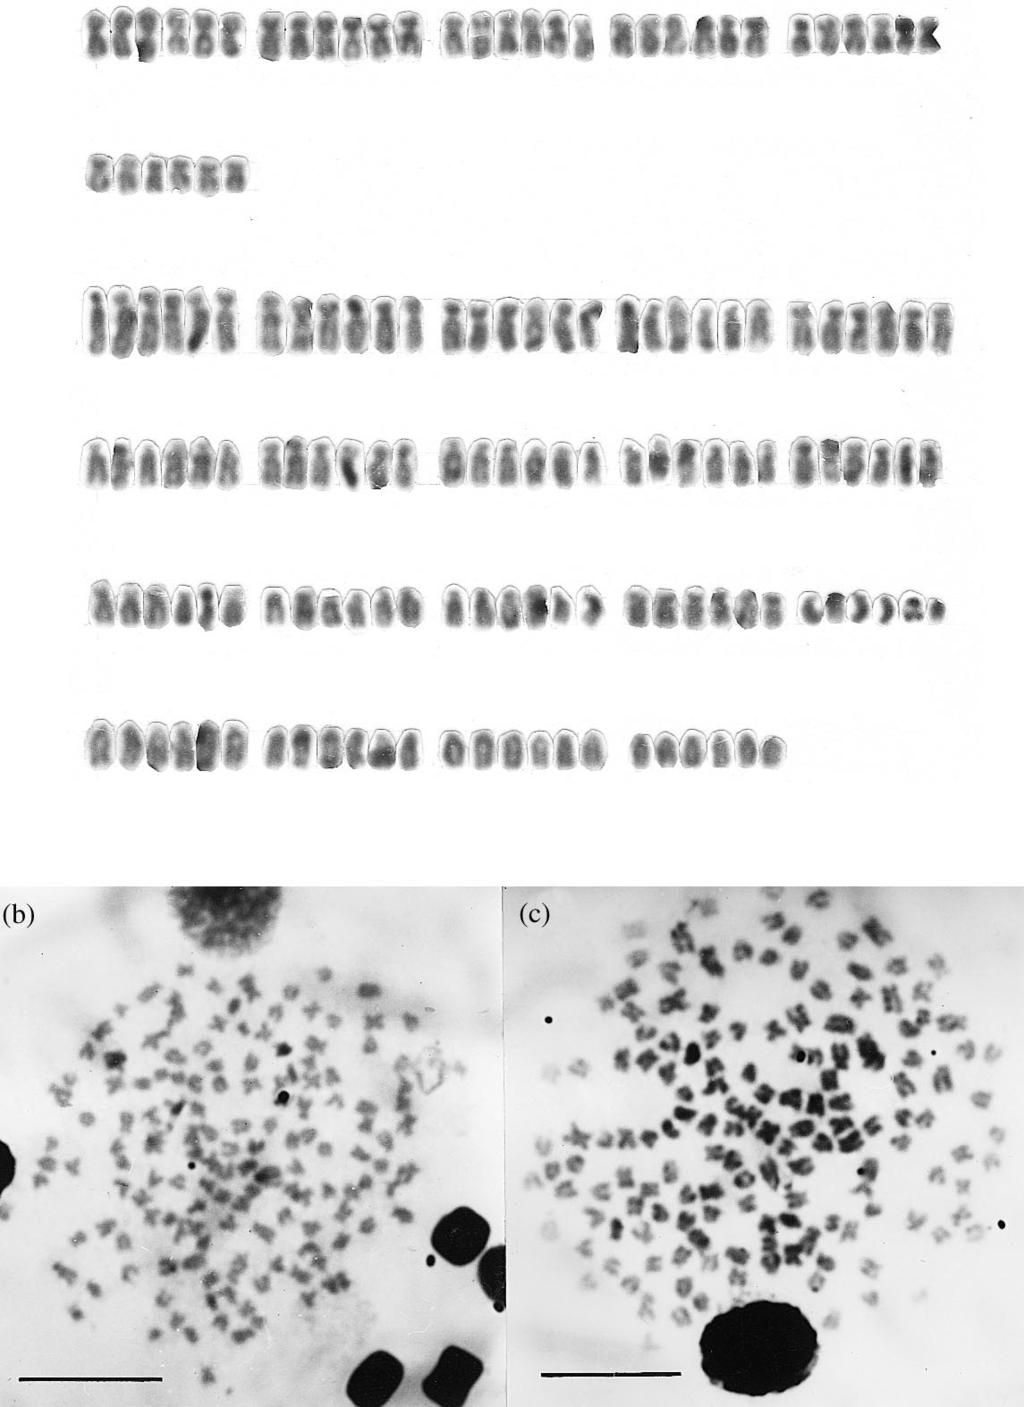 194 GUÉGAN ET AL. FIG. 1. Karyotype of Barbus petitjeani (a) and metaphase plates of B. bynni occidentalis (b) and B. wurtzi (c).